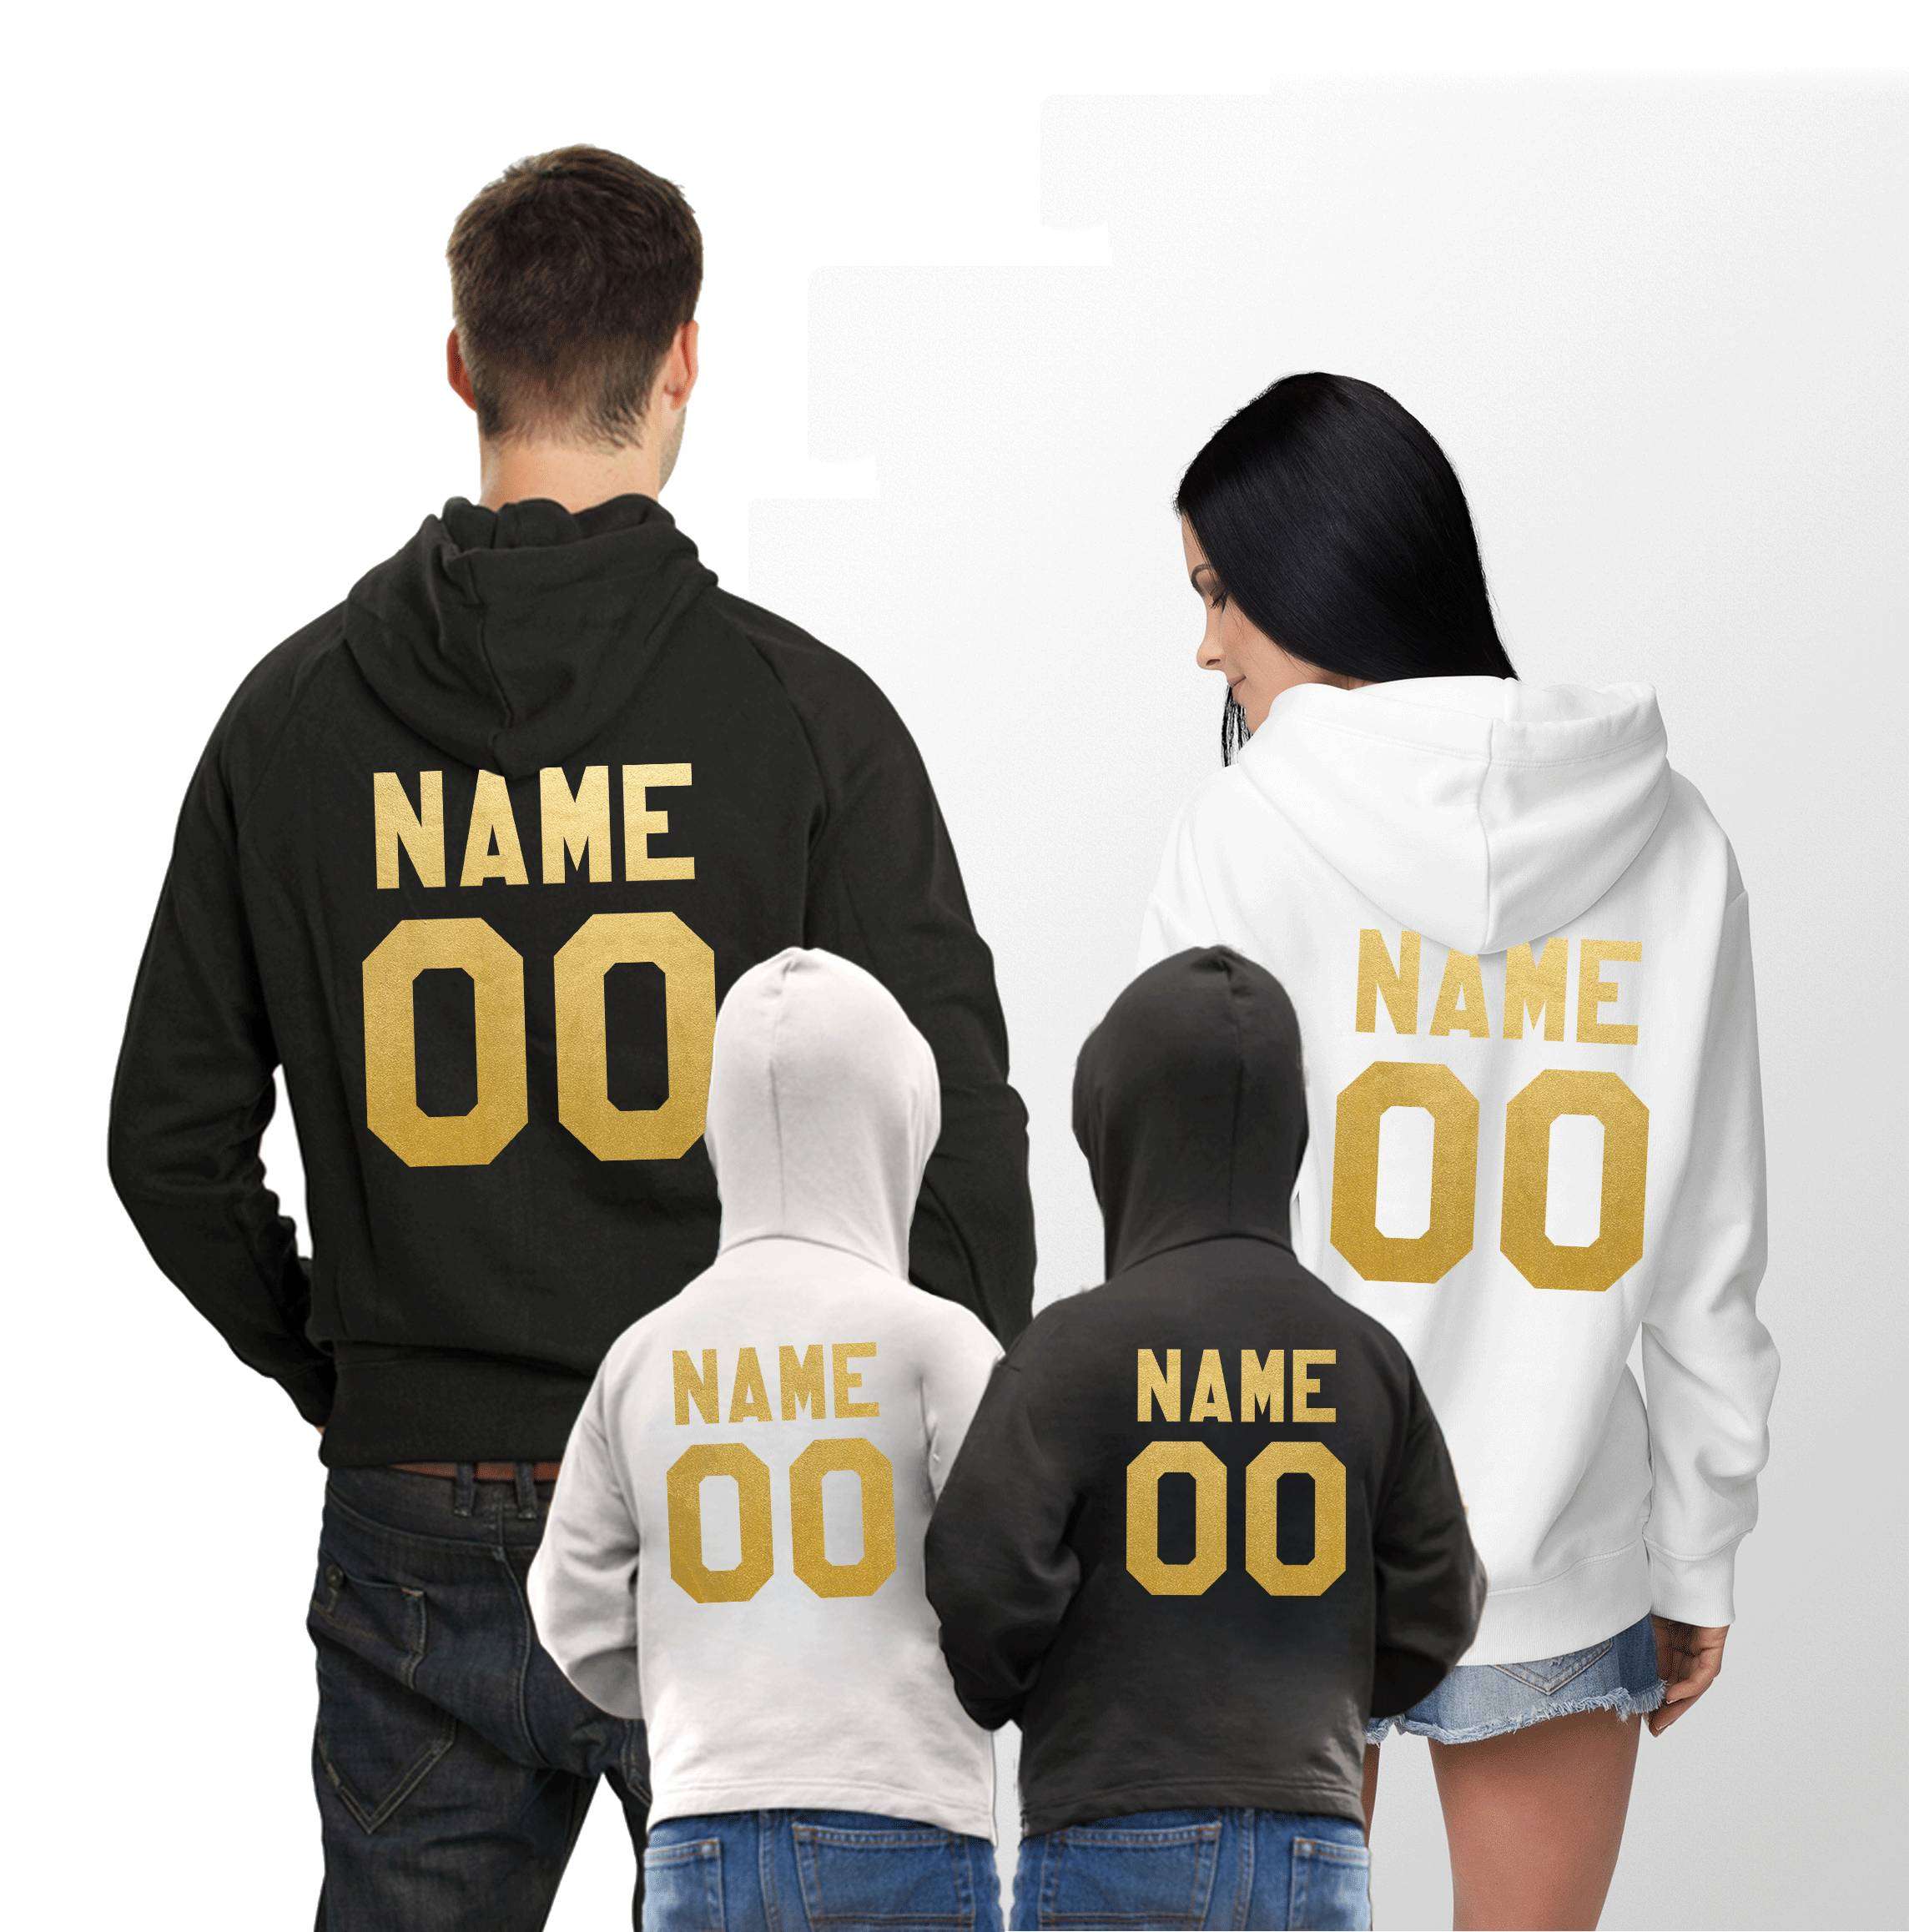 Personalized Matching Family Hoodies - Awesome Matching Shirts for Couples,  Families and Friends by Epic Tees